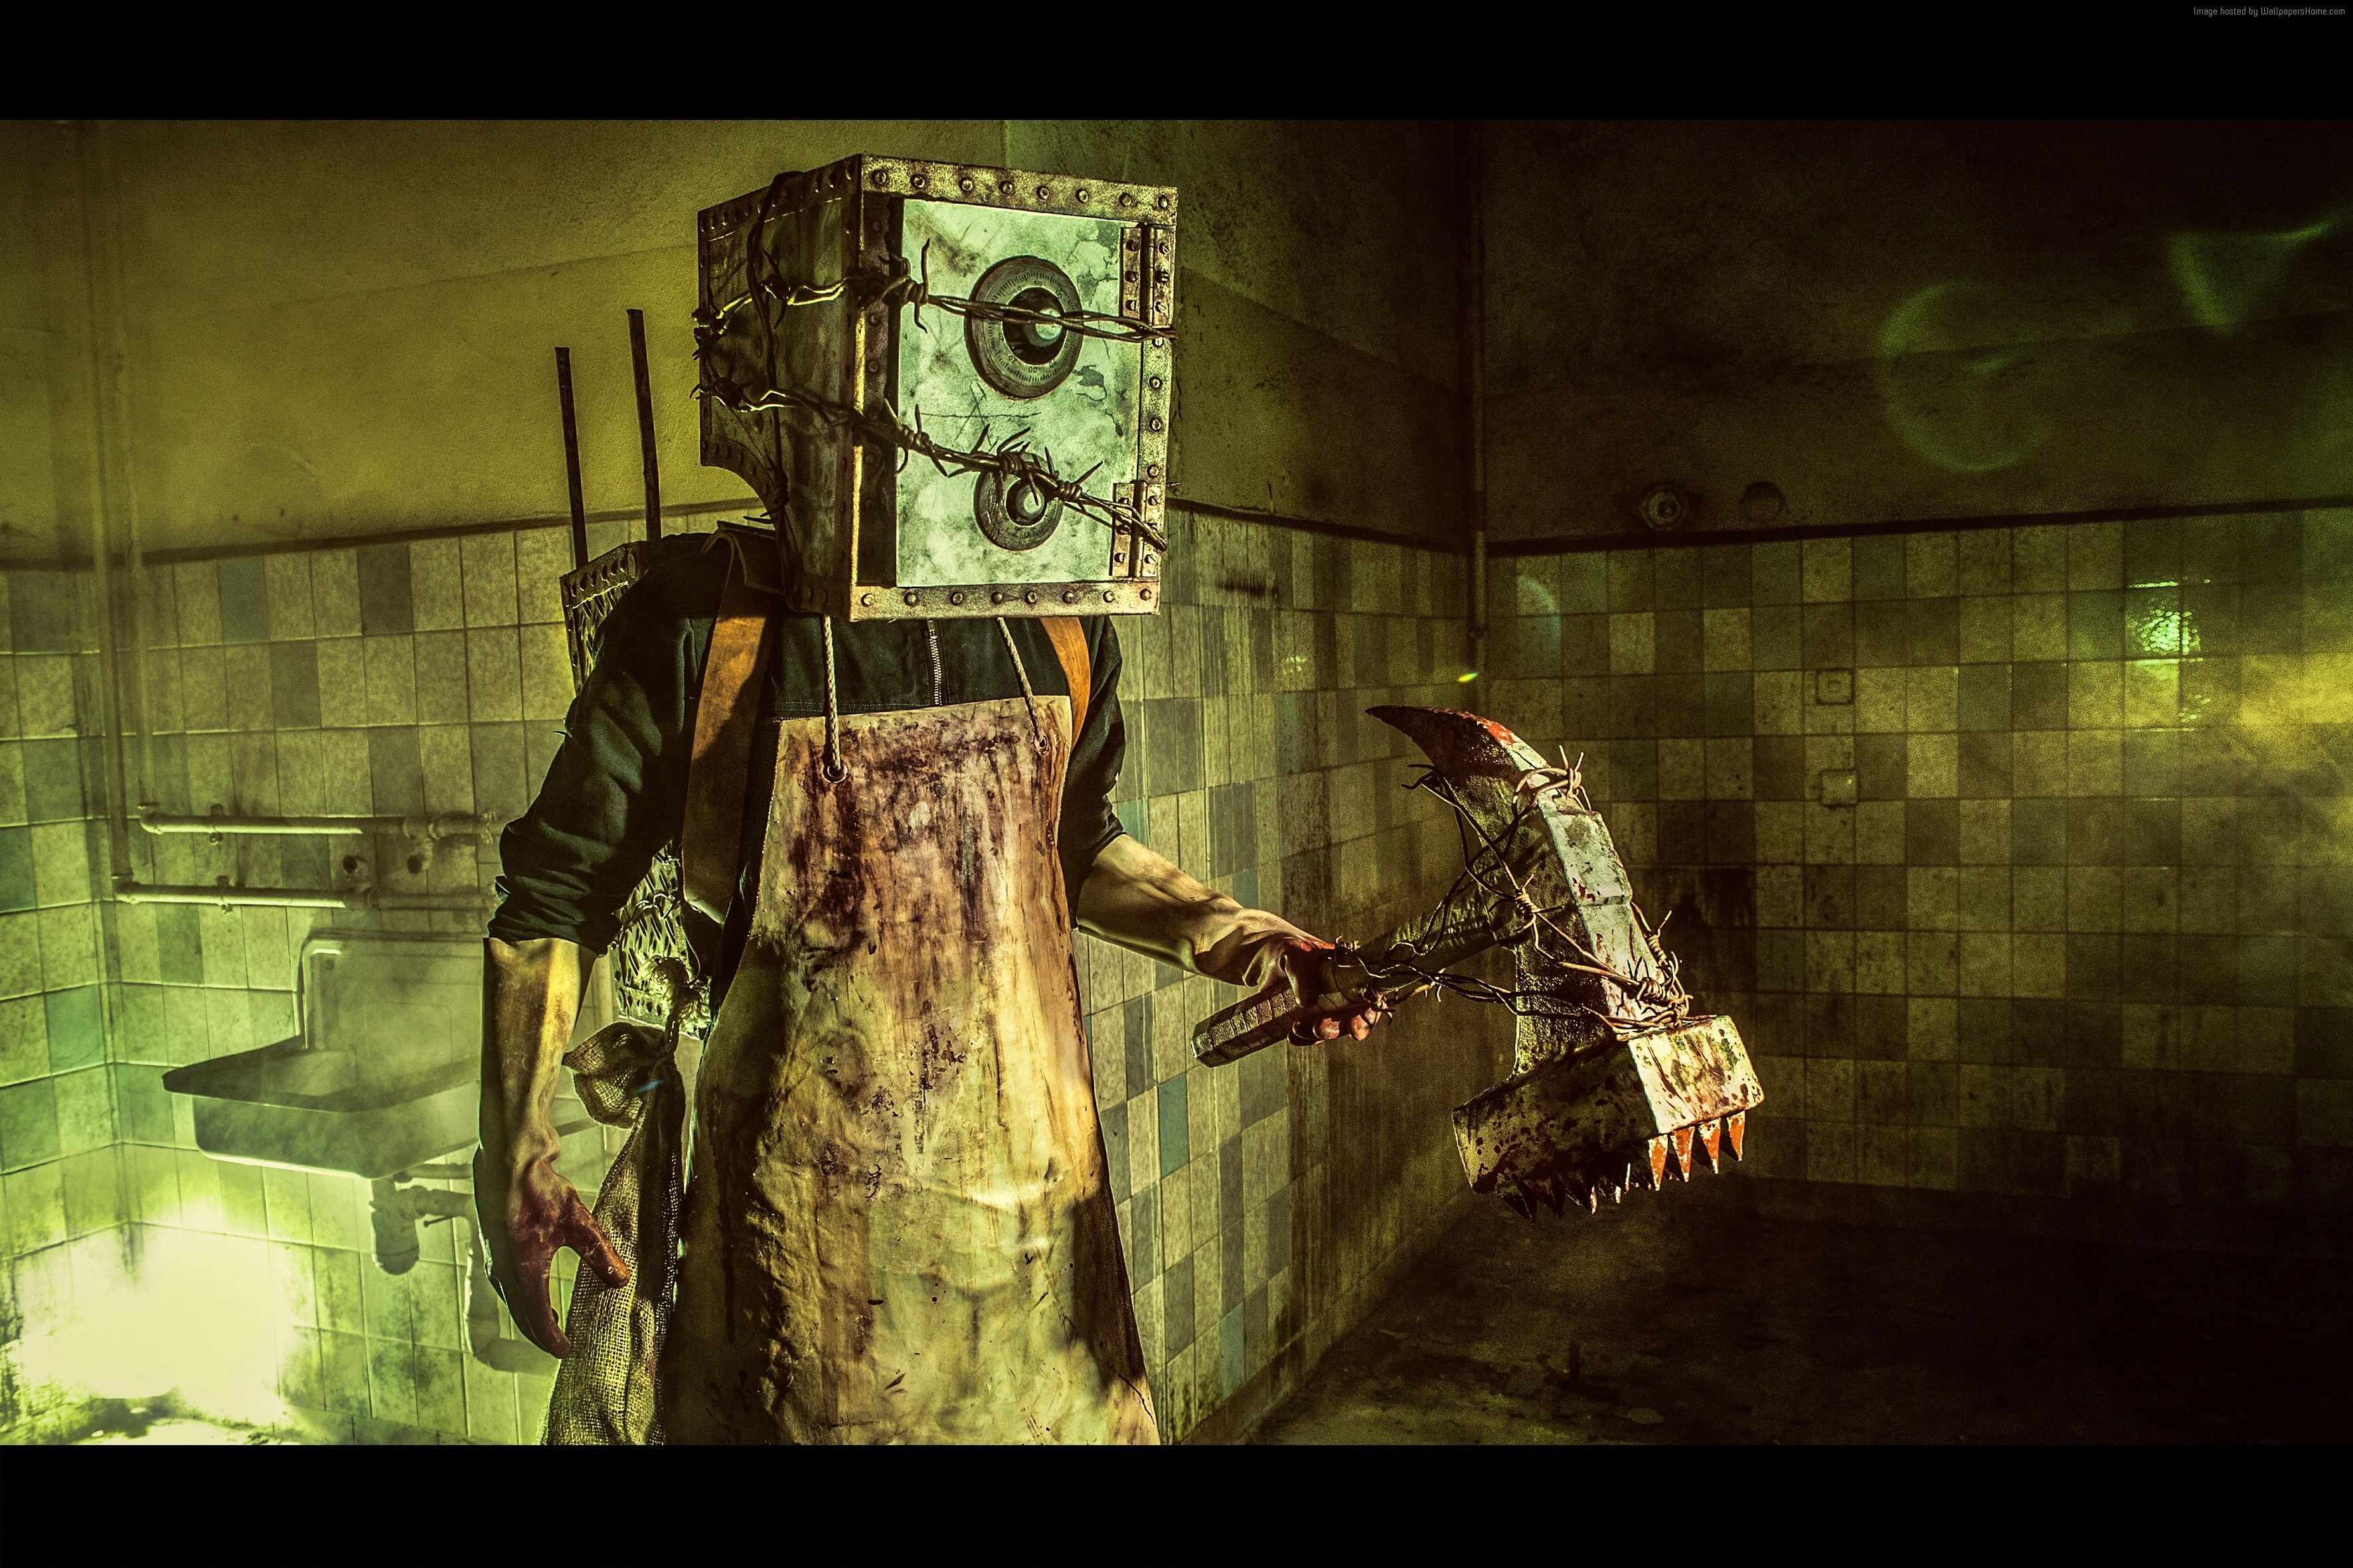 #The Evil Within, #Mikami, #survival horror, #Boxman, #game